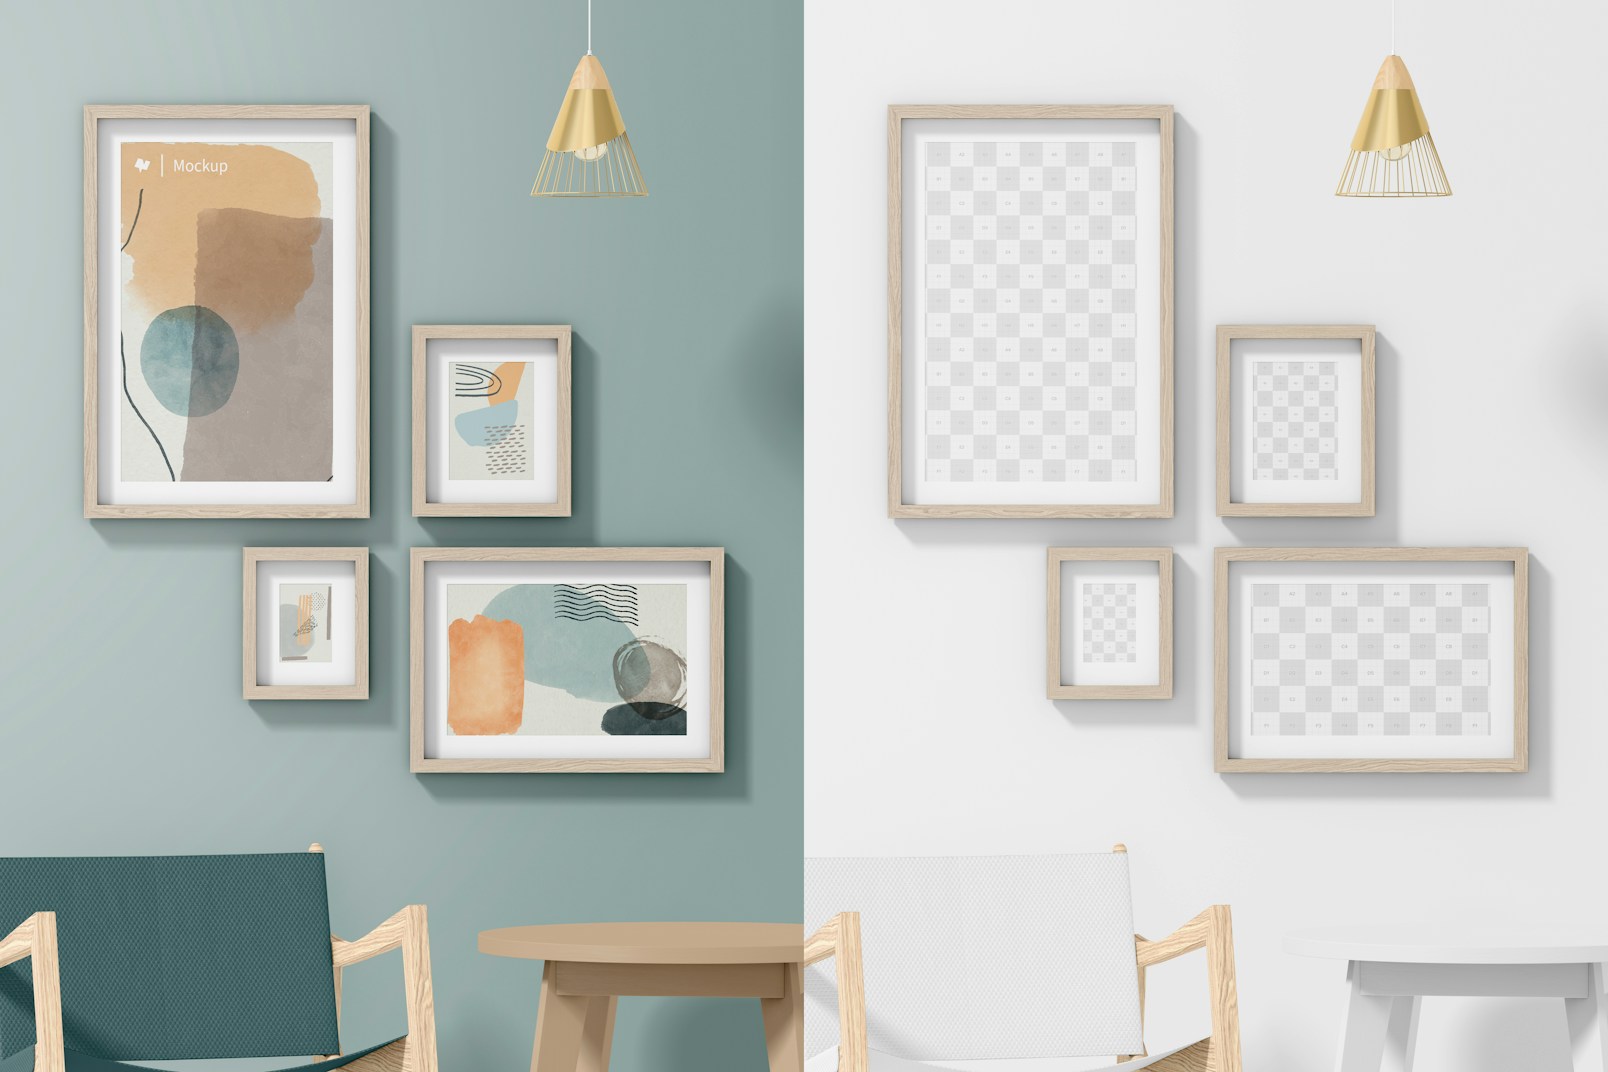 4 Gallery Frames with Rocking Chair Mockup, Front View